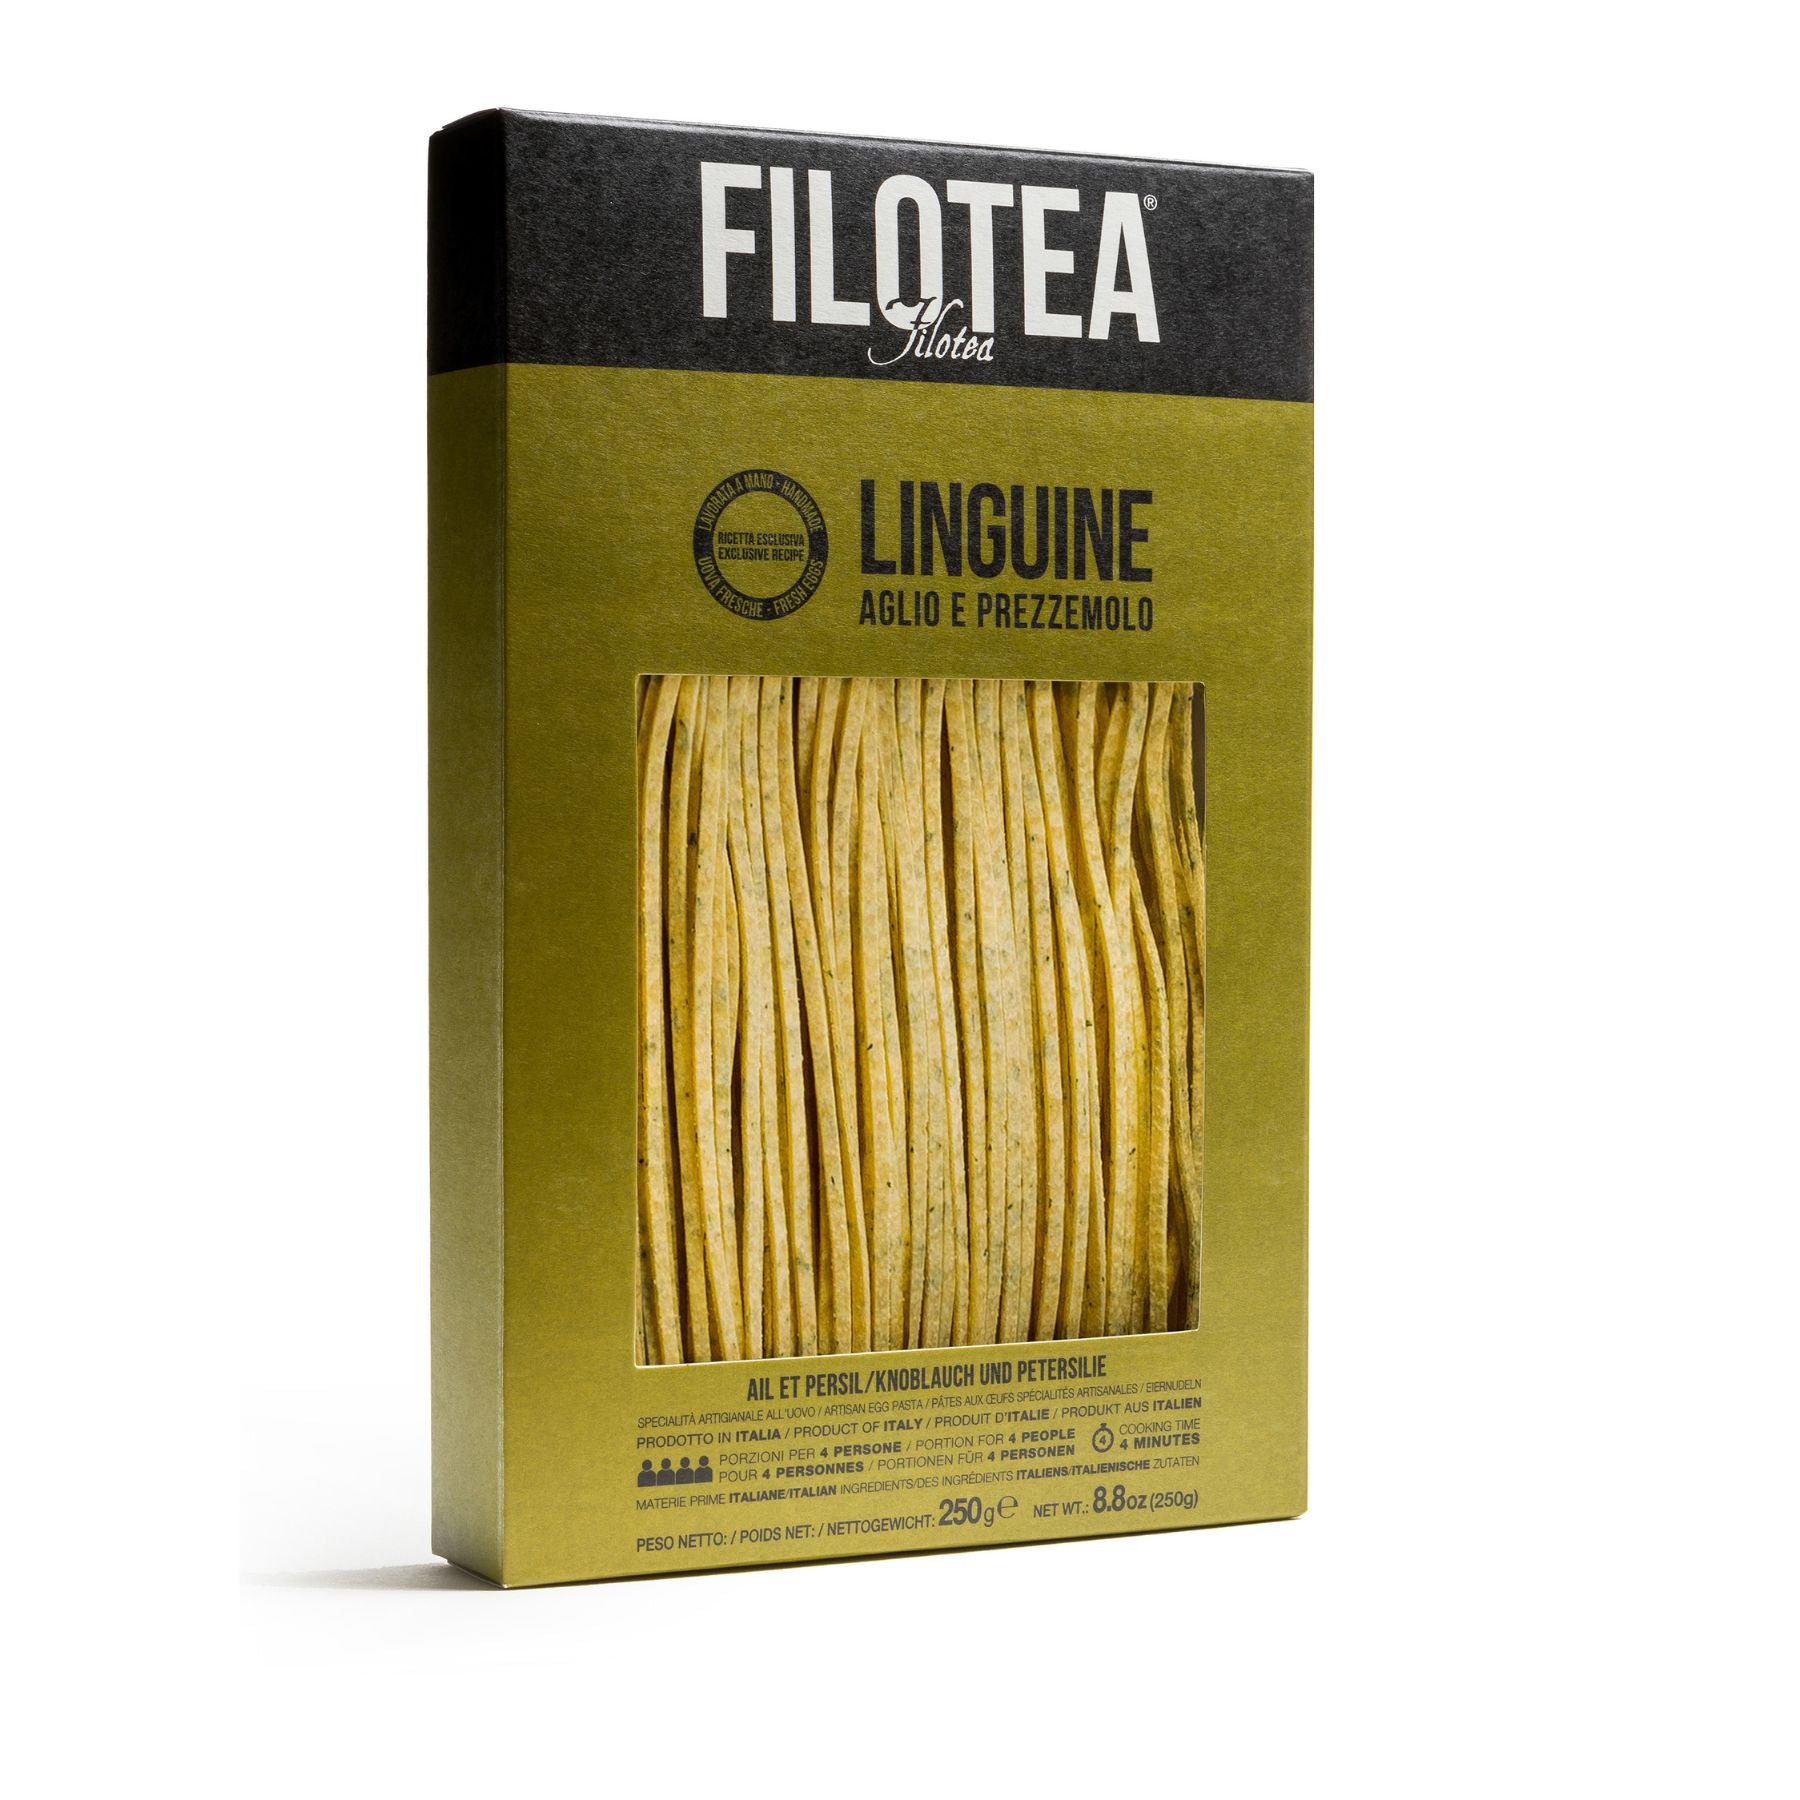 Filotea Garlic & Parsley Linguine Egg Pasta 250g | Imported and distributed in the UK by Just Gourmet Foods